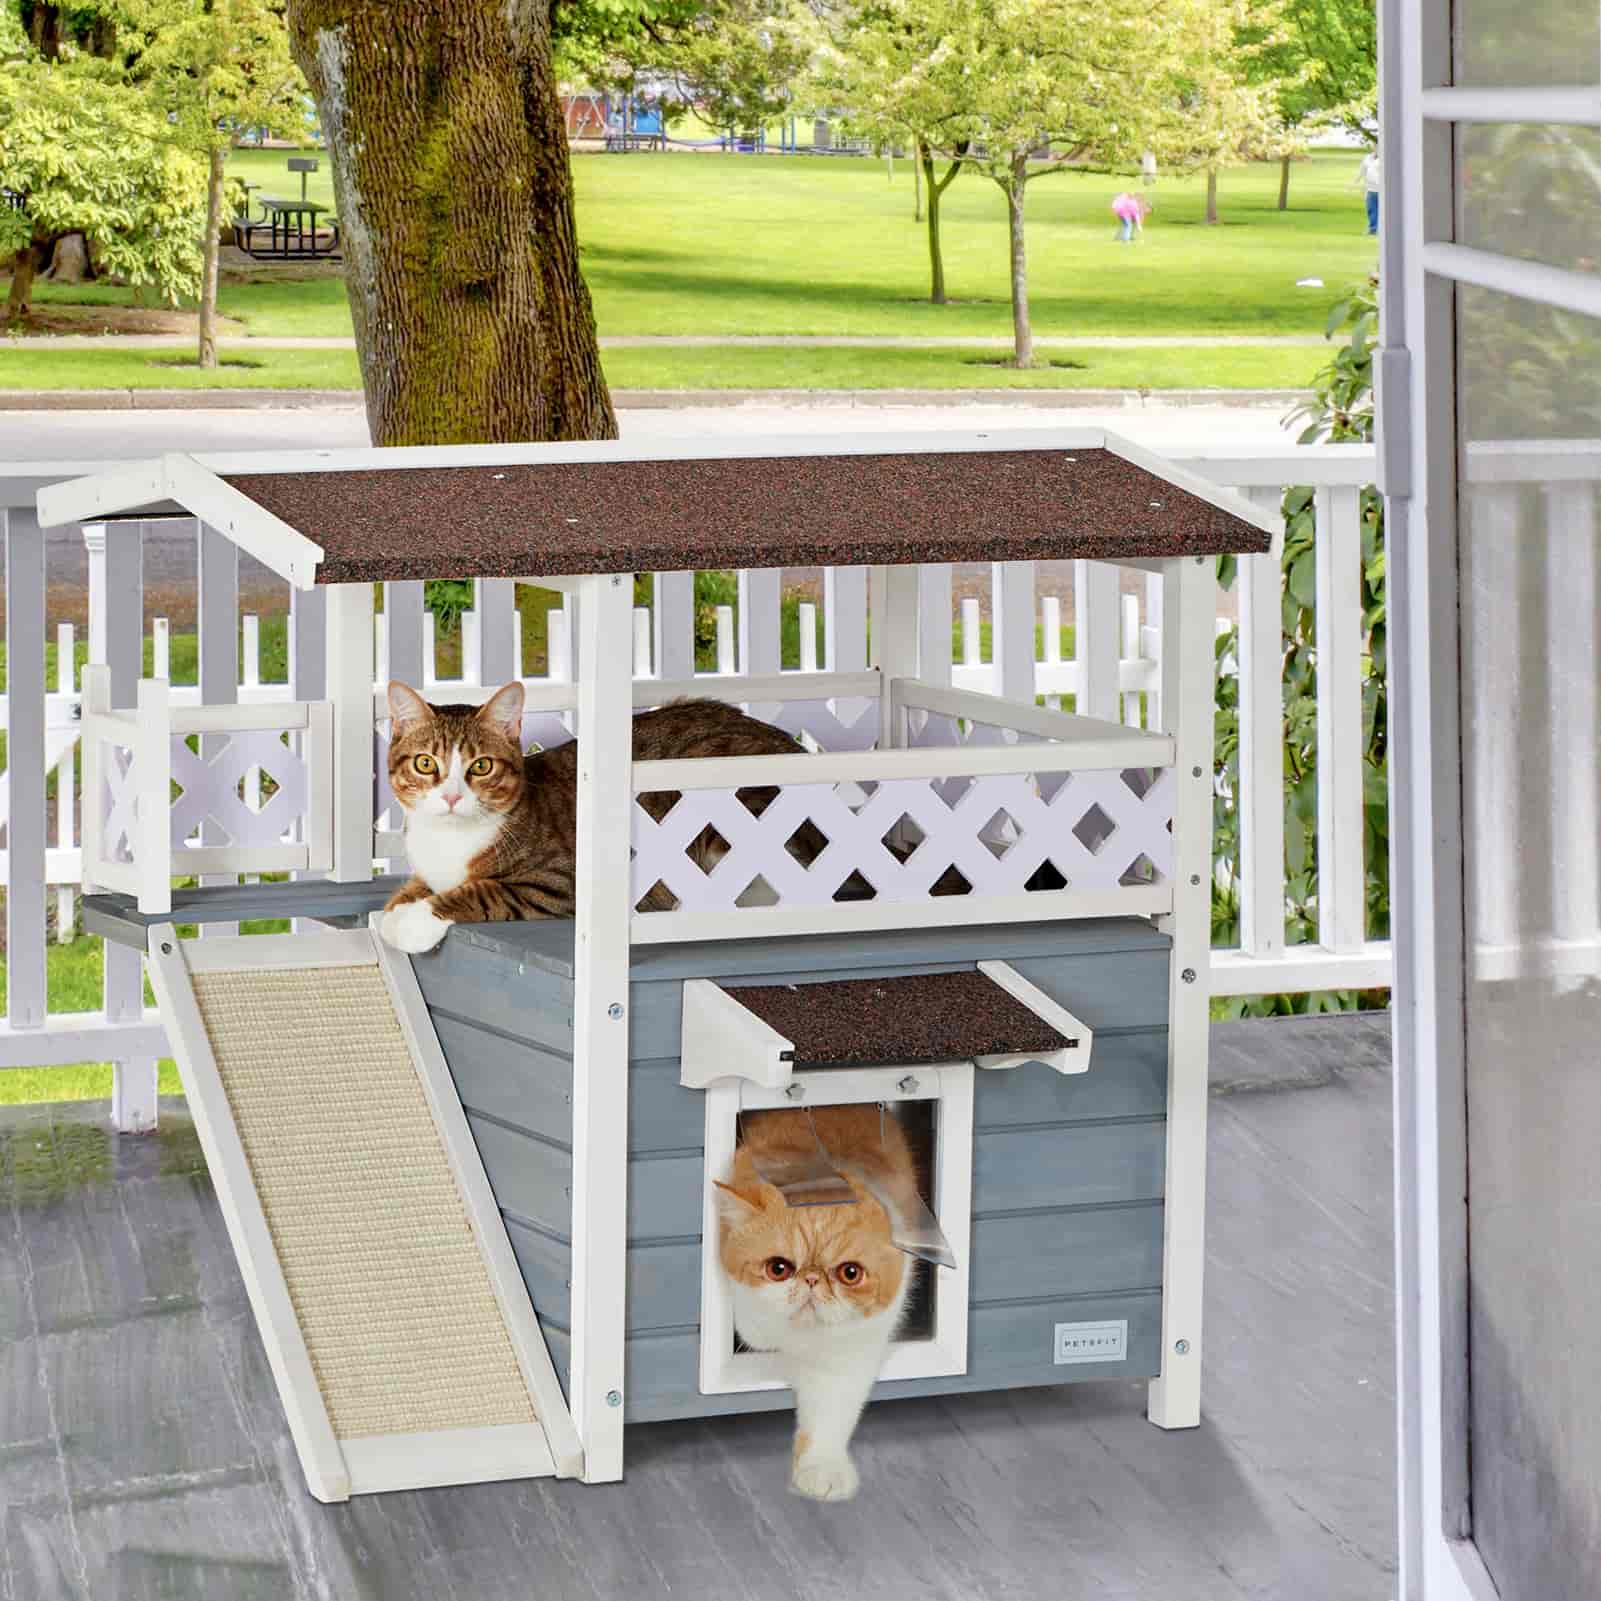 Petsfit Durable Roof Outside Cat House Weatherproof with Escape Door, Stair or Scratch Board, 2 Story Design Perfect for Multi Cats, Outdoor Cat House